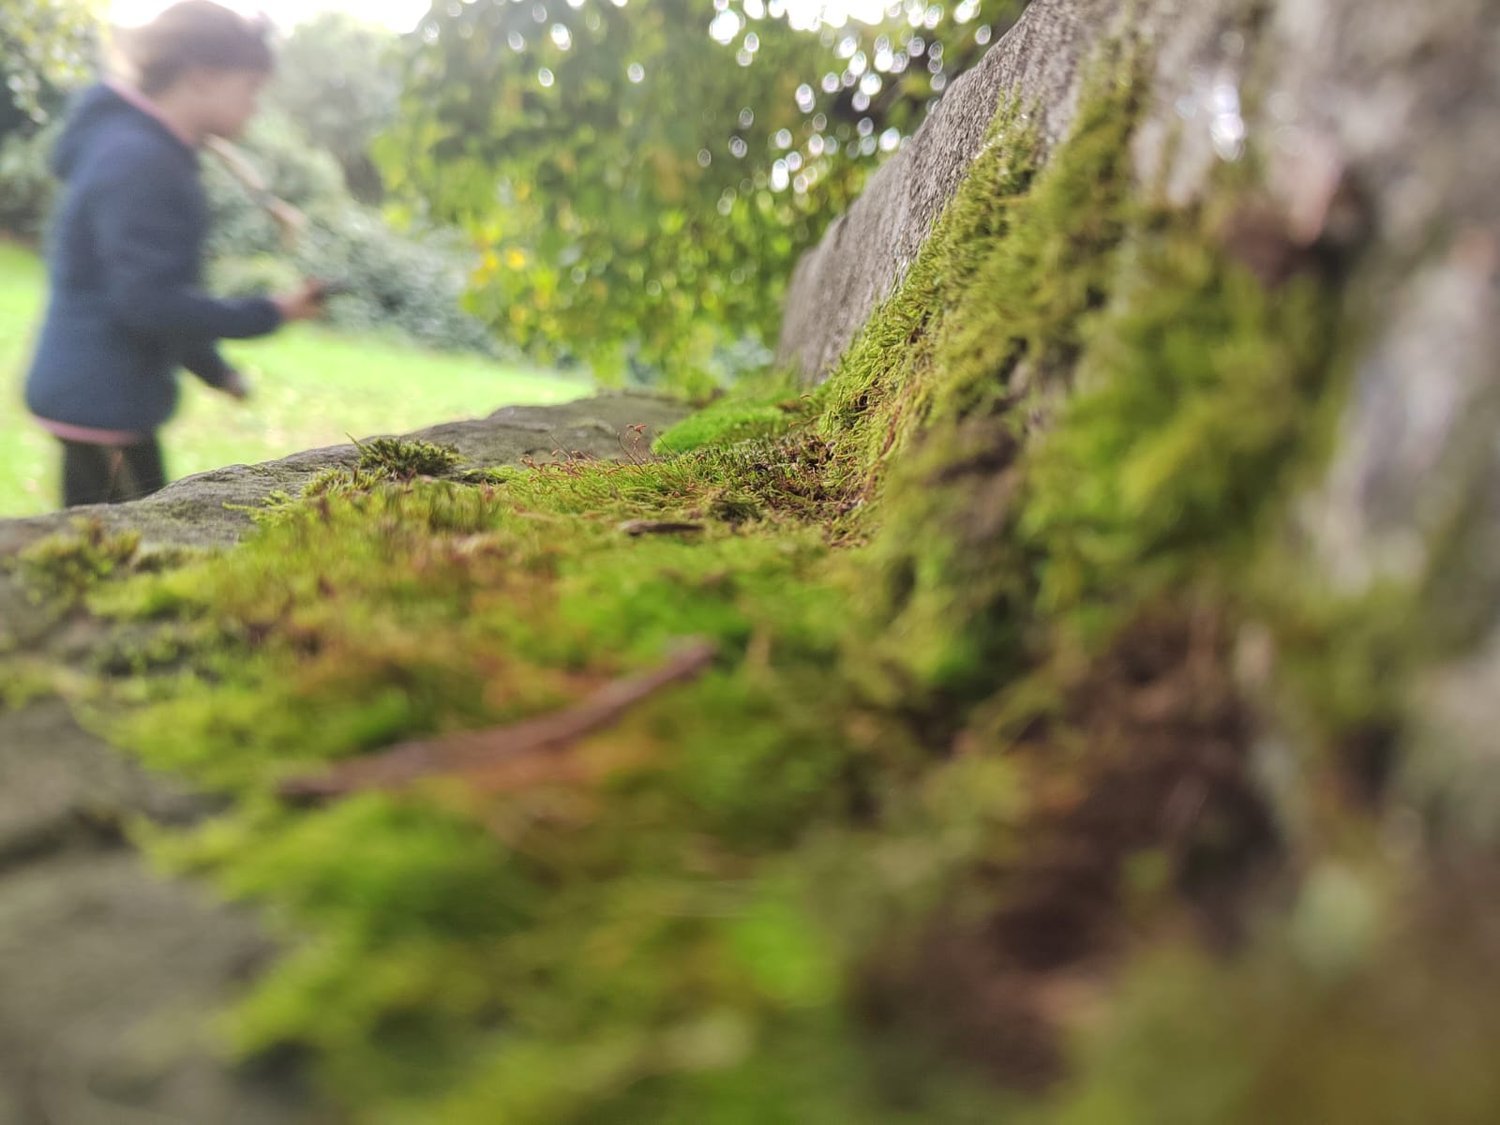 Zooming in on moss and stone, it looks like a mini earth.